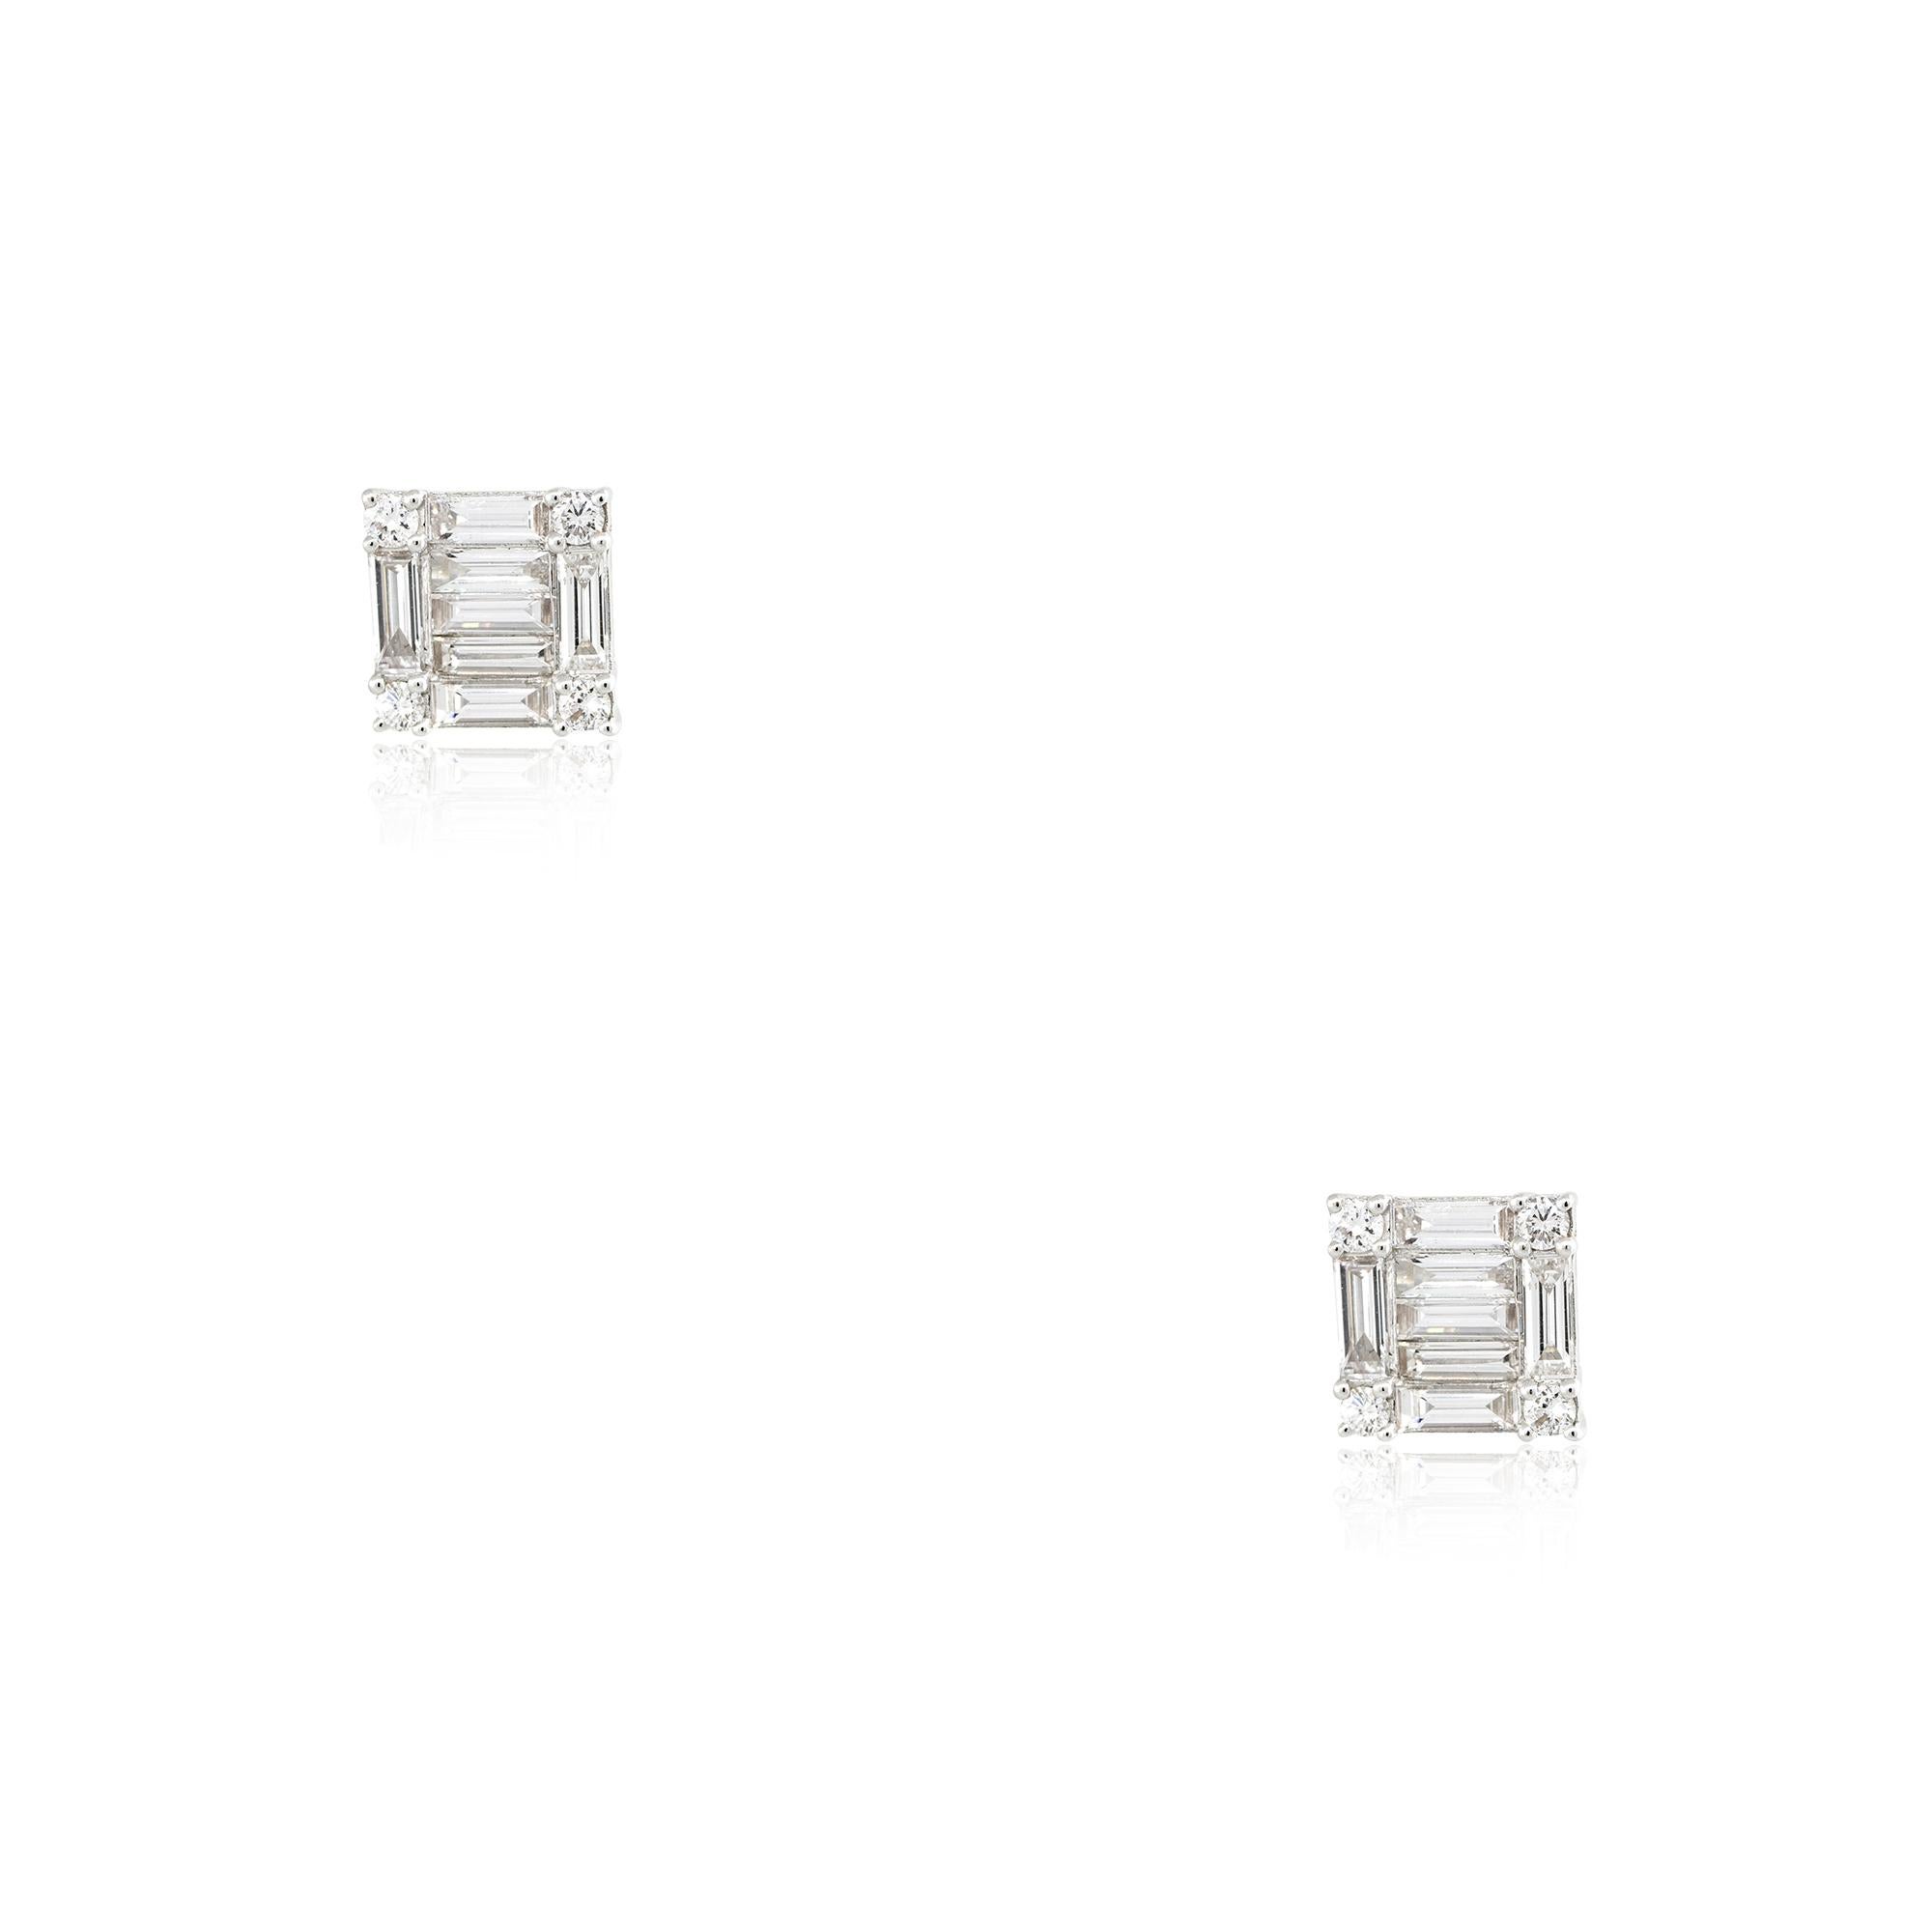 18k White Gold 1.42ctw Multi-Shape Square Diamond Stud Earrings
Material: 18k White Gold
Diamond Details: Diamonds are approximately 1.42ctw of Round Brilliant and Baguette cut Diamonds. There are 22 diamonds total and all diamonds are approximately